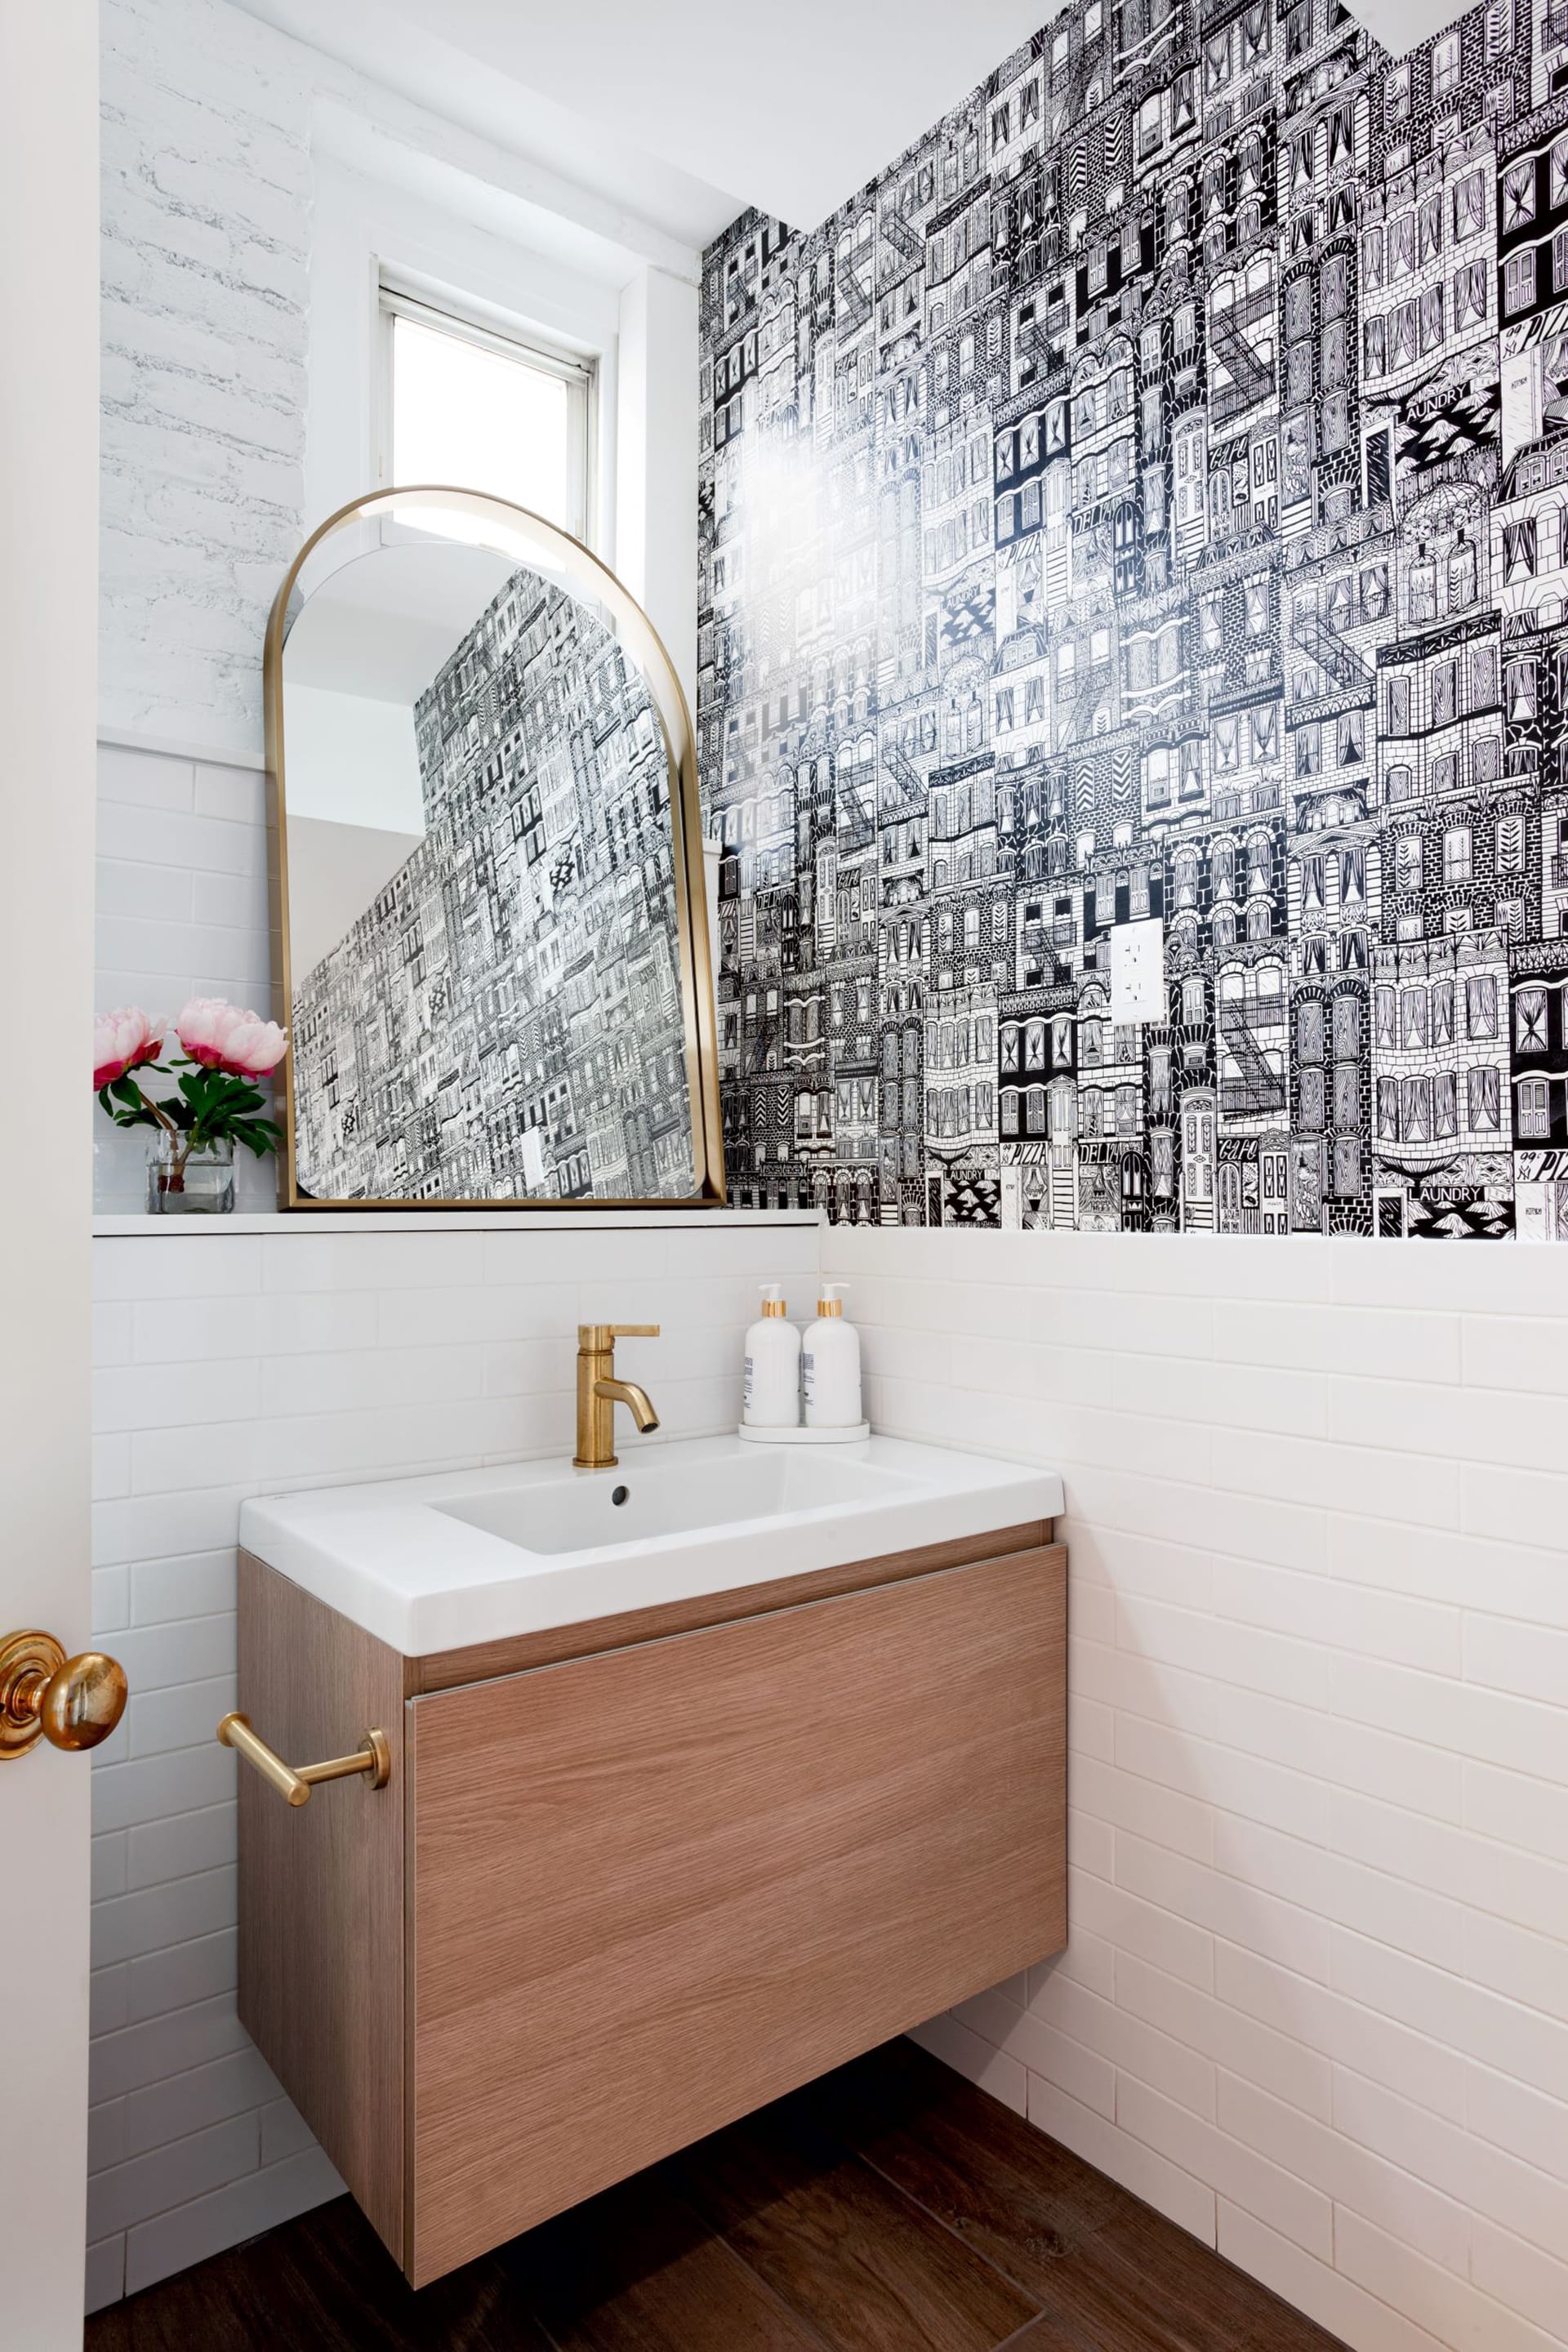 Powder room with a floating vanity, black and white townhouse-print wallpaper, and white subway tiles that reach chair-rail height.